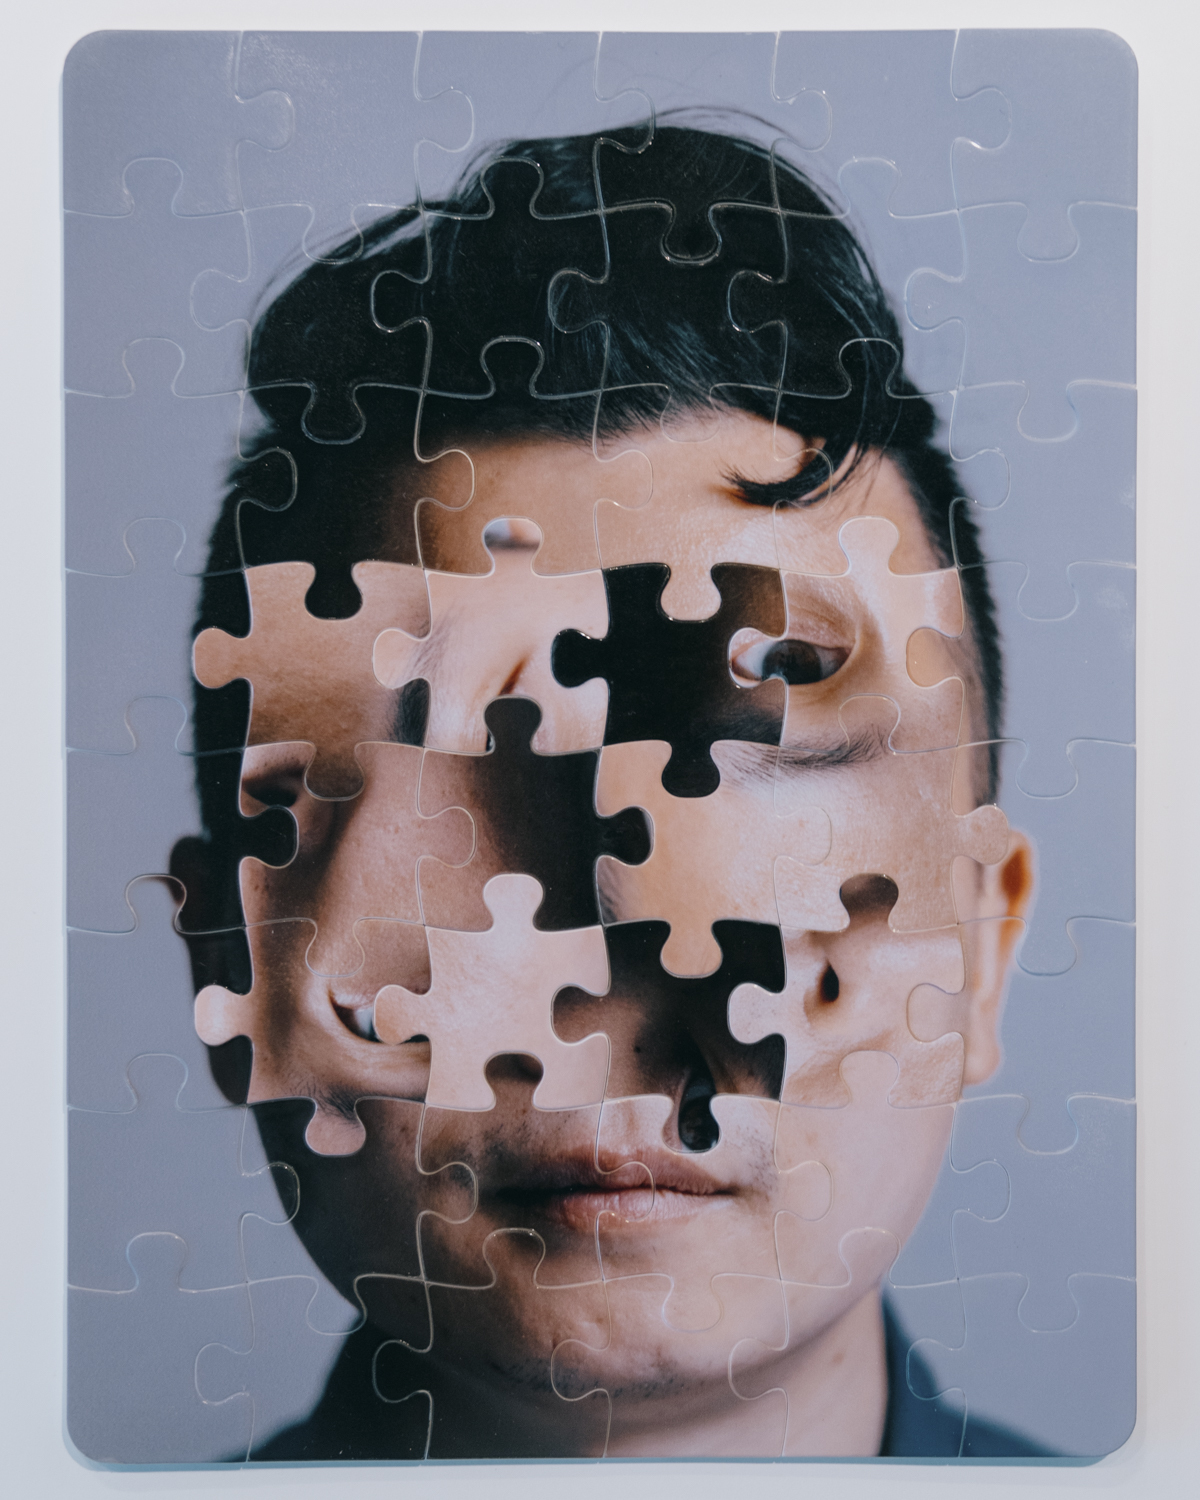 A man's face made up of puzzle pieces